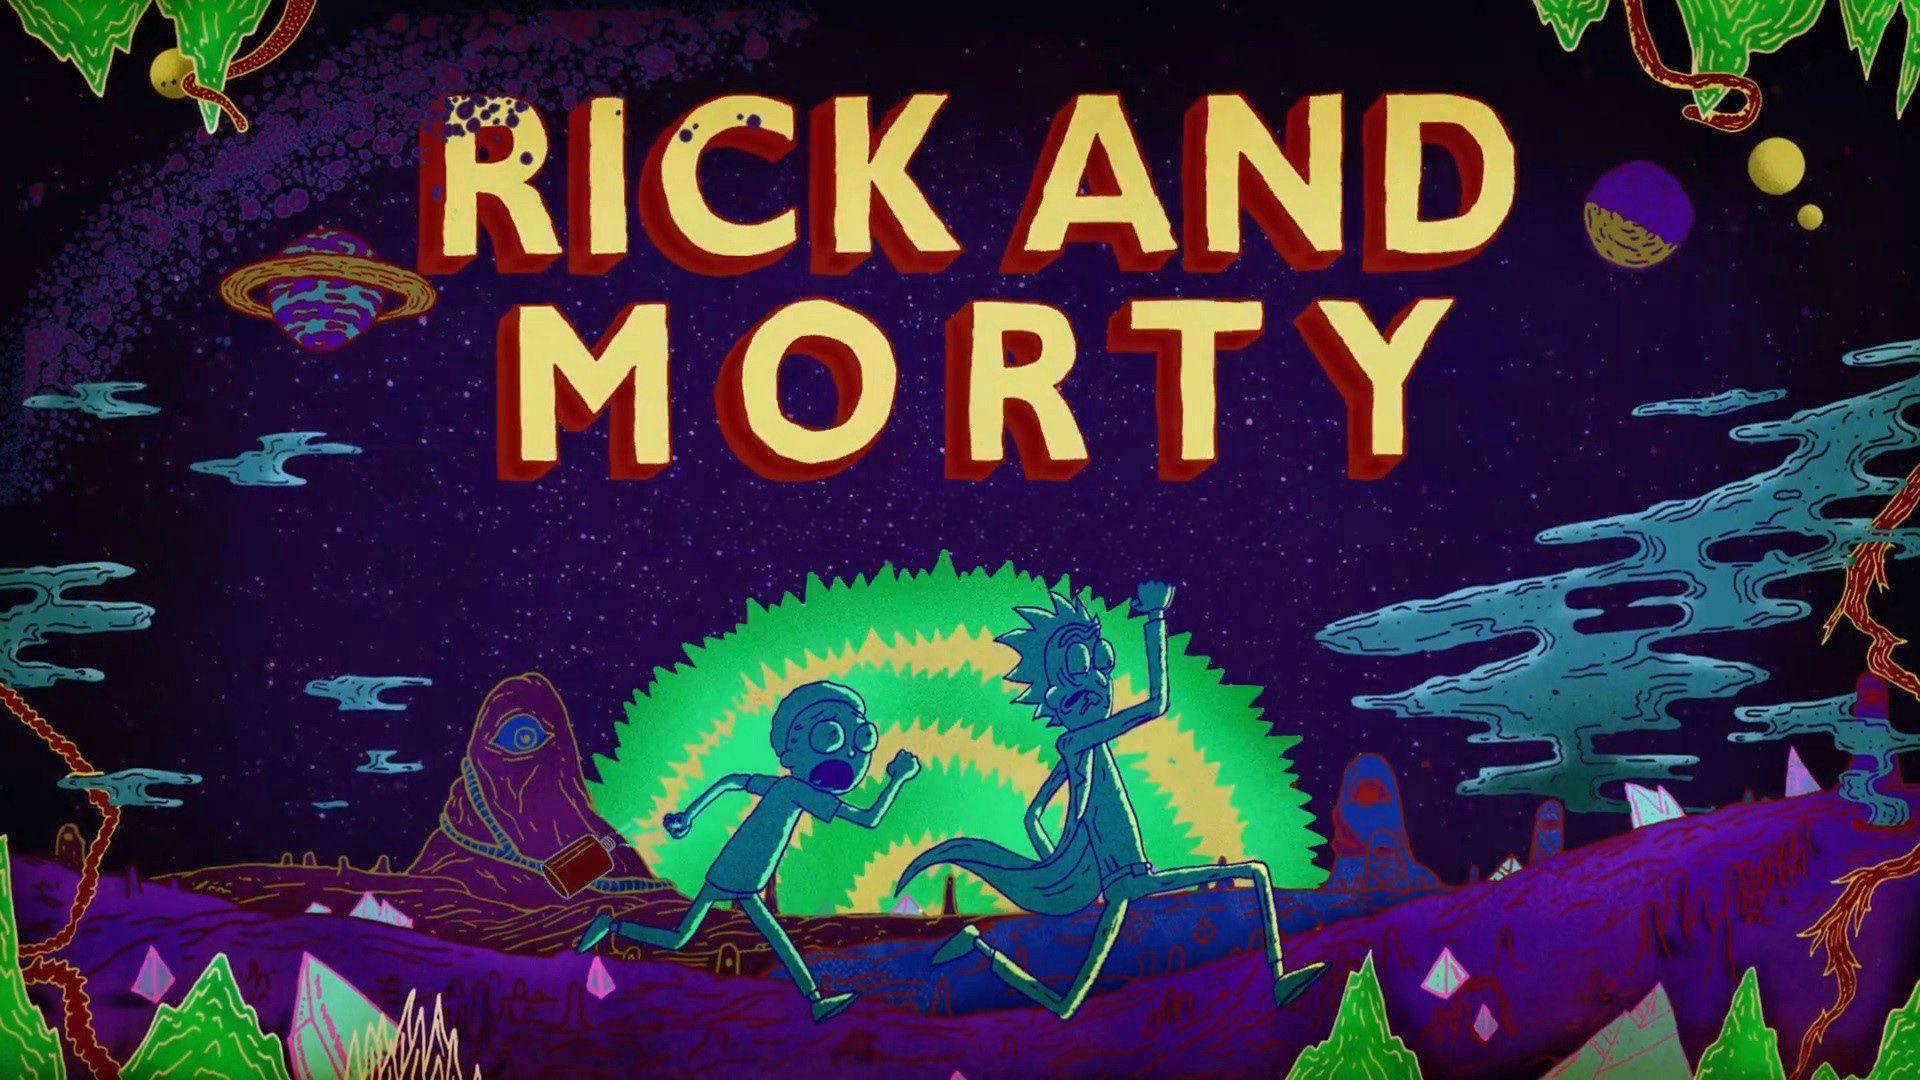 Rick and Morty Wallpapers • Latest Collection • TrumpWallpapers